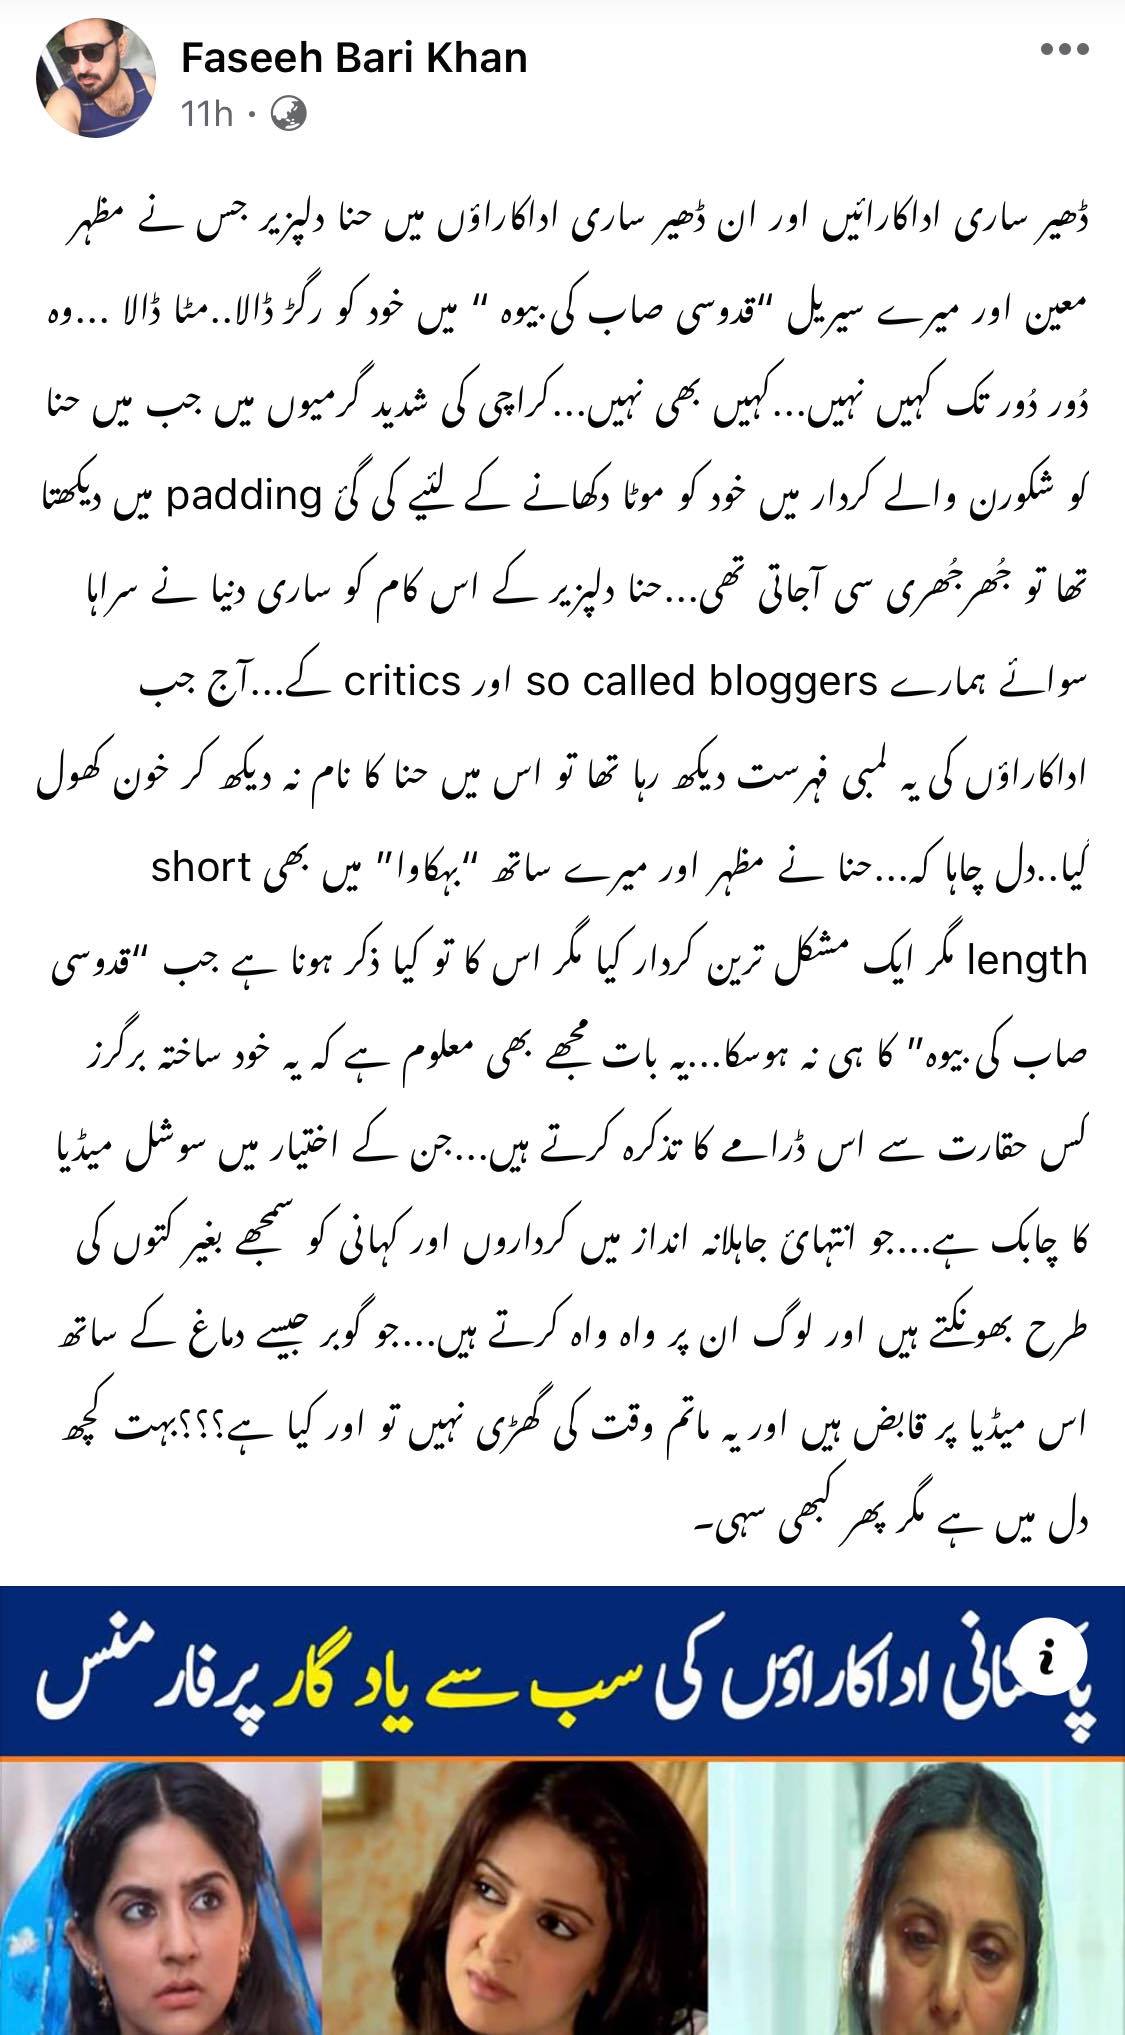 Our Reply To Faseeh Bari Using Degrading Language For Bloggers